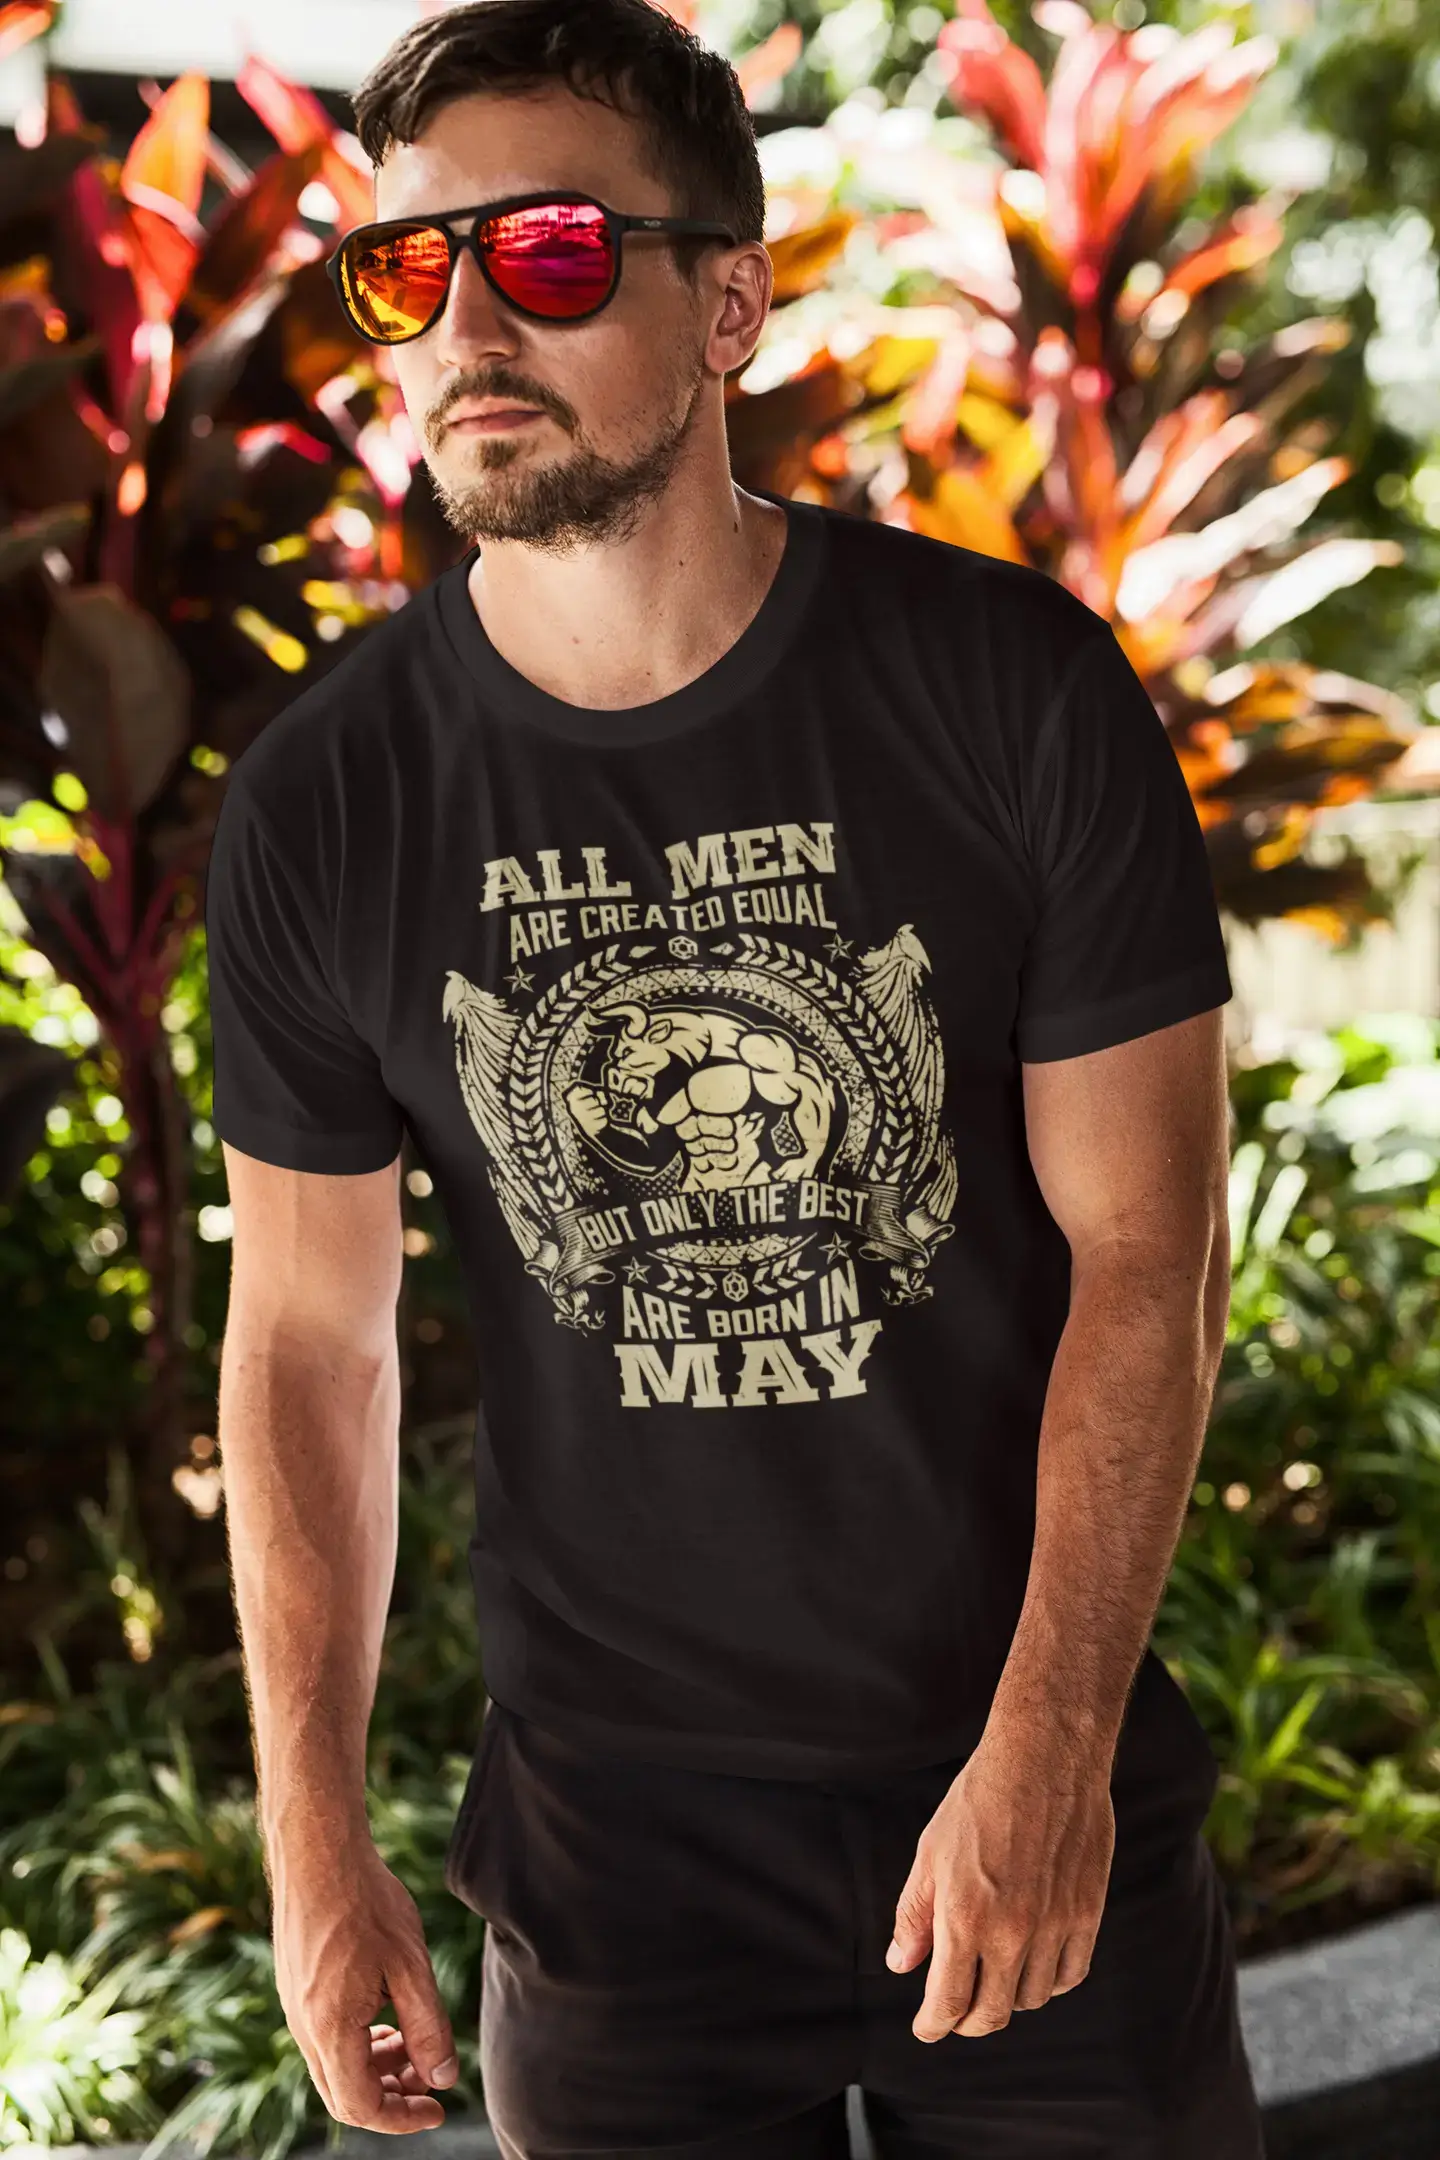 ULTRABASIC Men's Vintage T-Shirt Only the Best are Born in May - Birthday Gift Tee Shirt